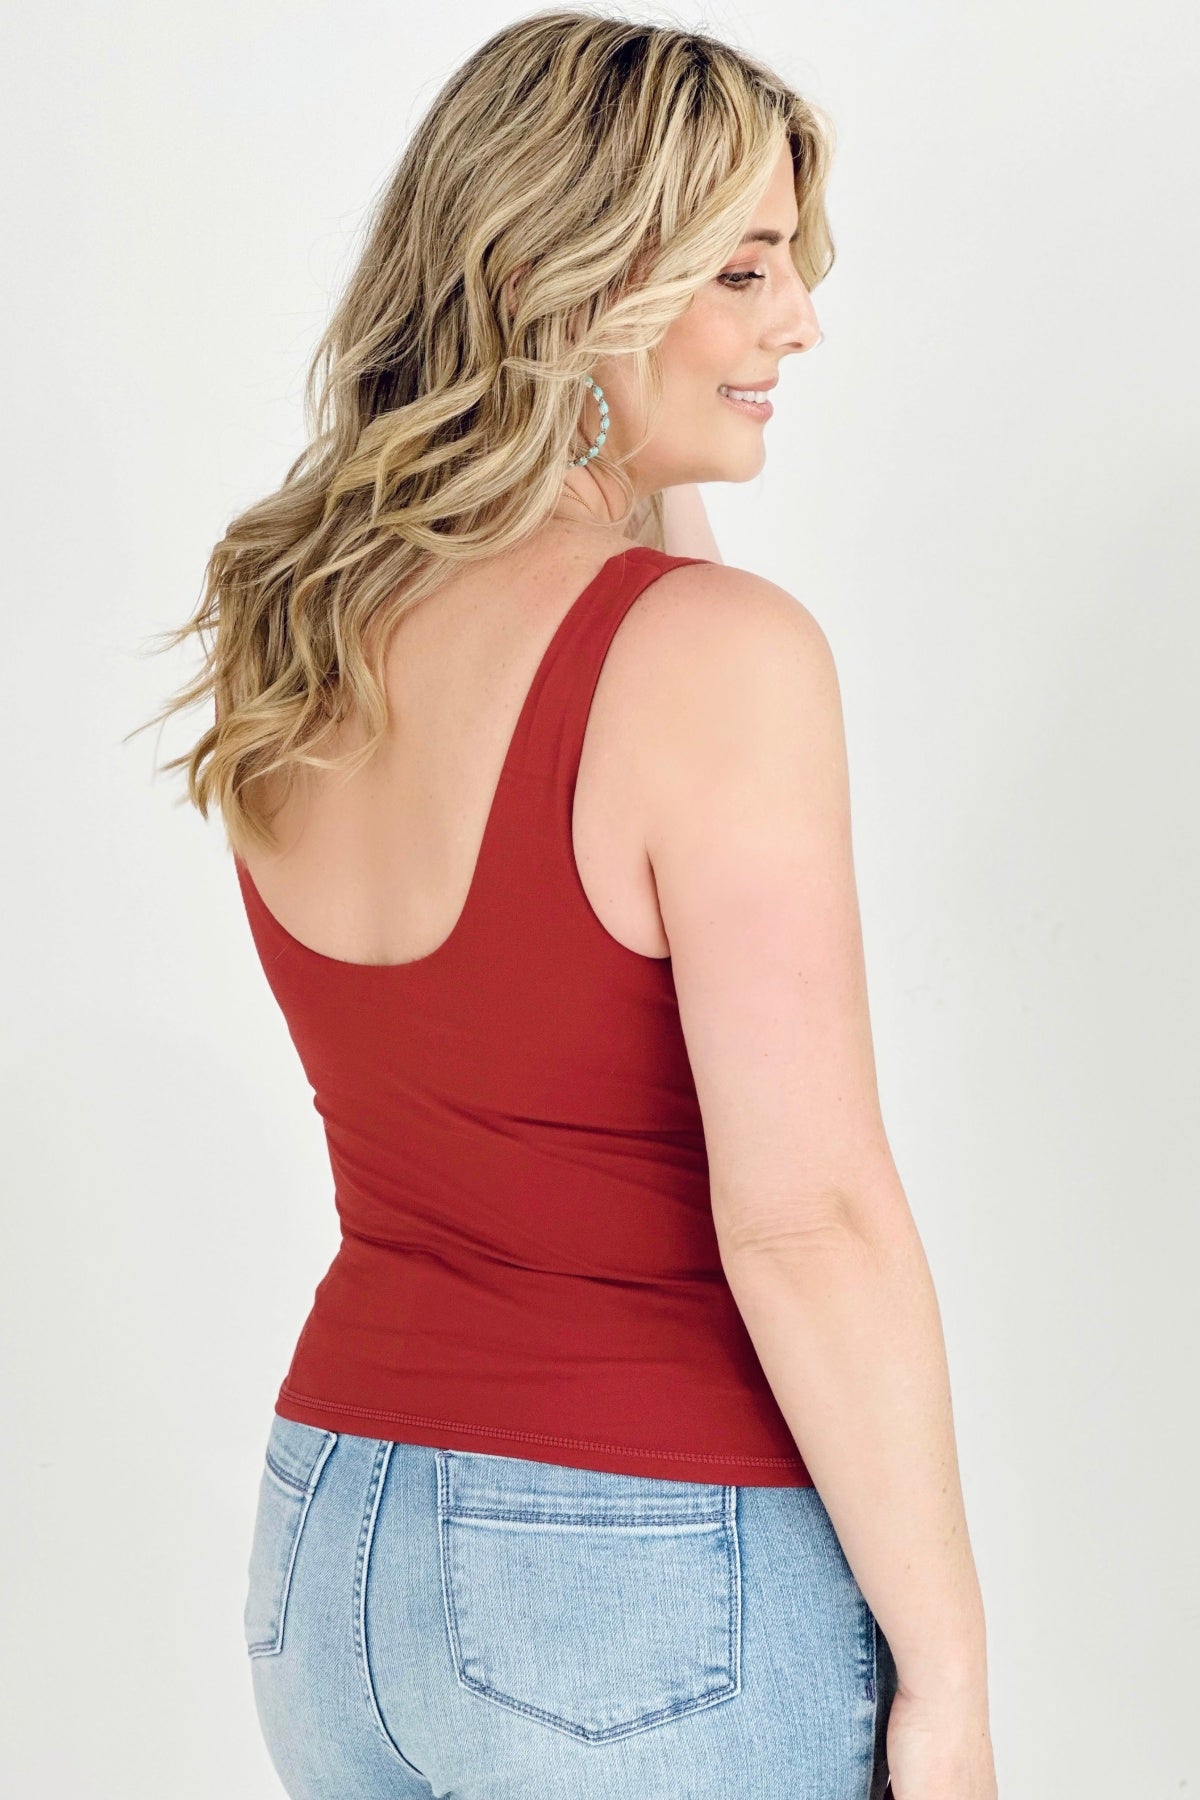 11 Colors - FawnFit Medium Length Lift Tank 2.0 with Built-In Bra!